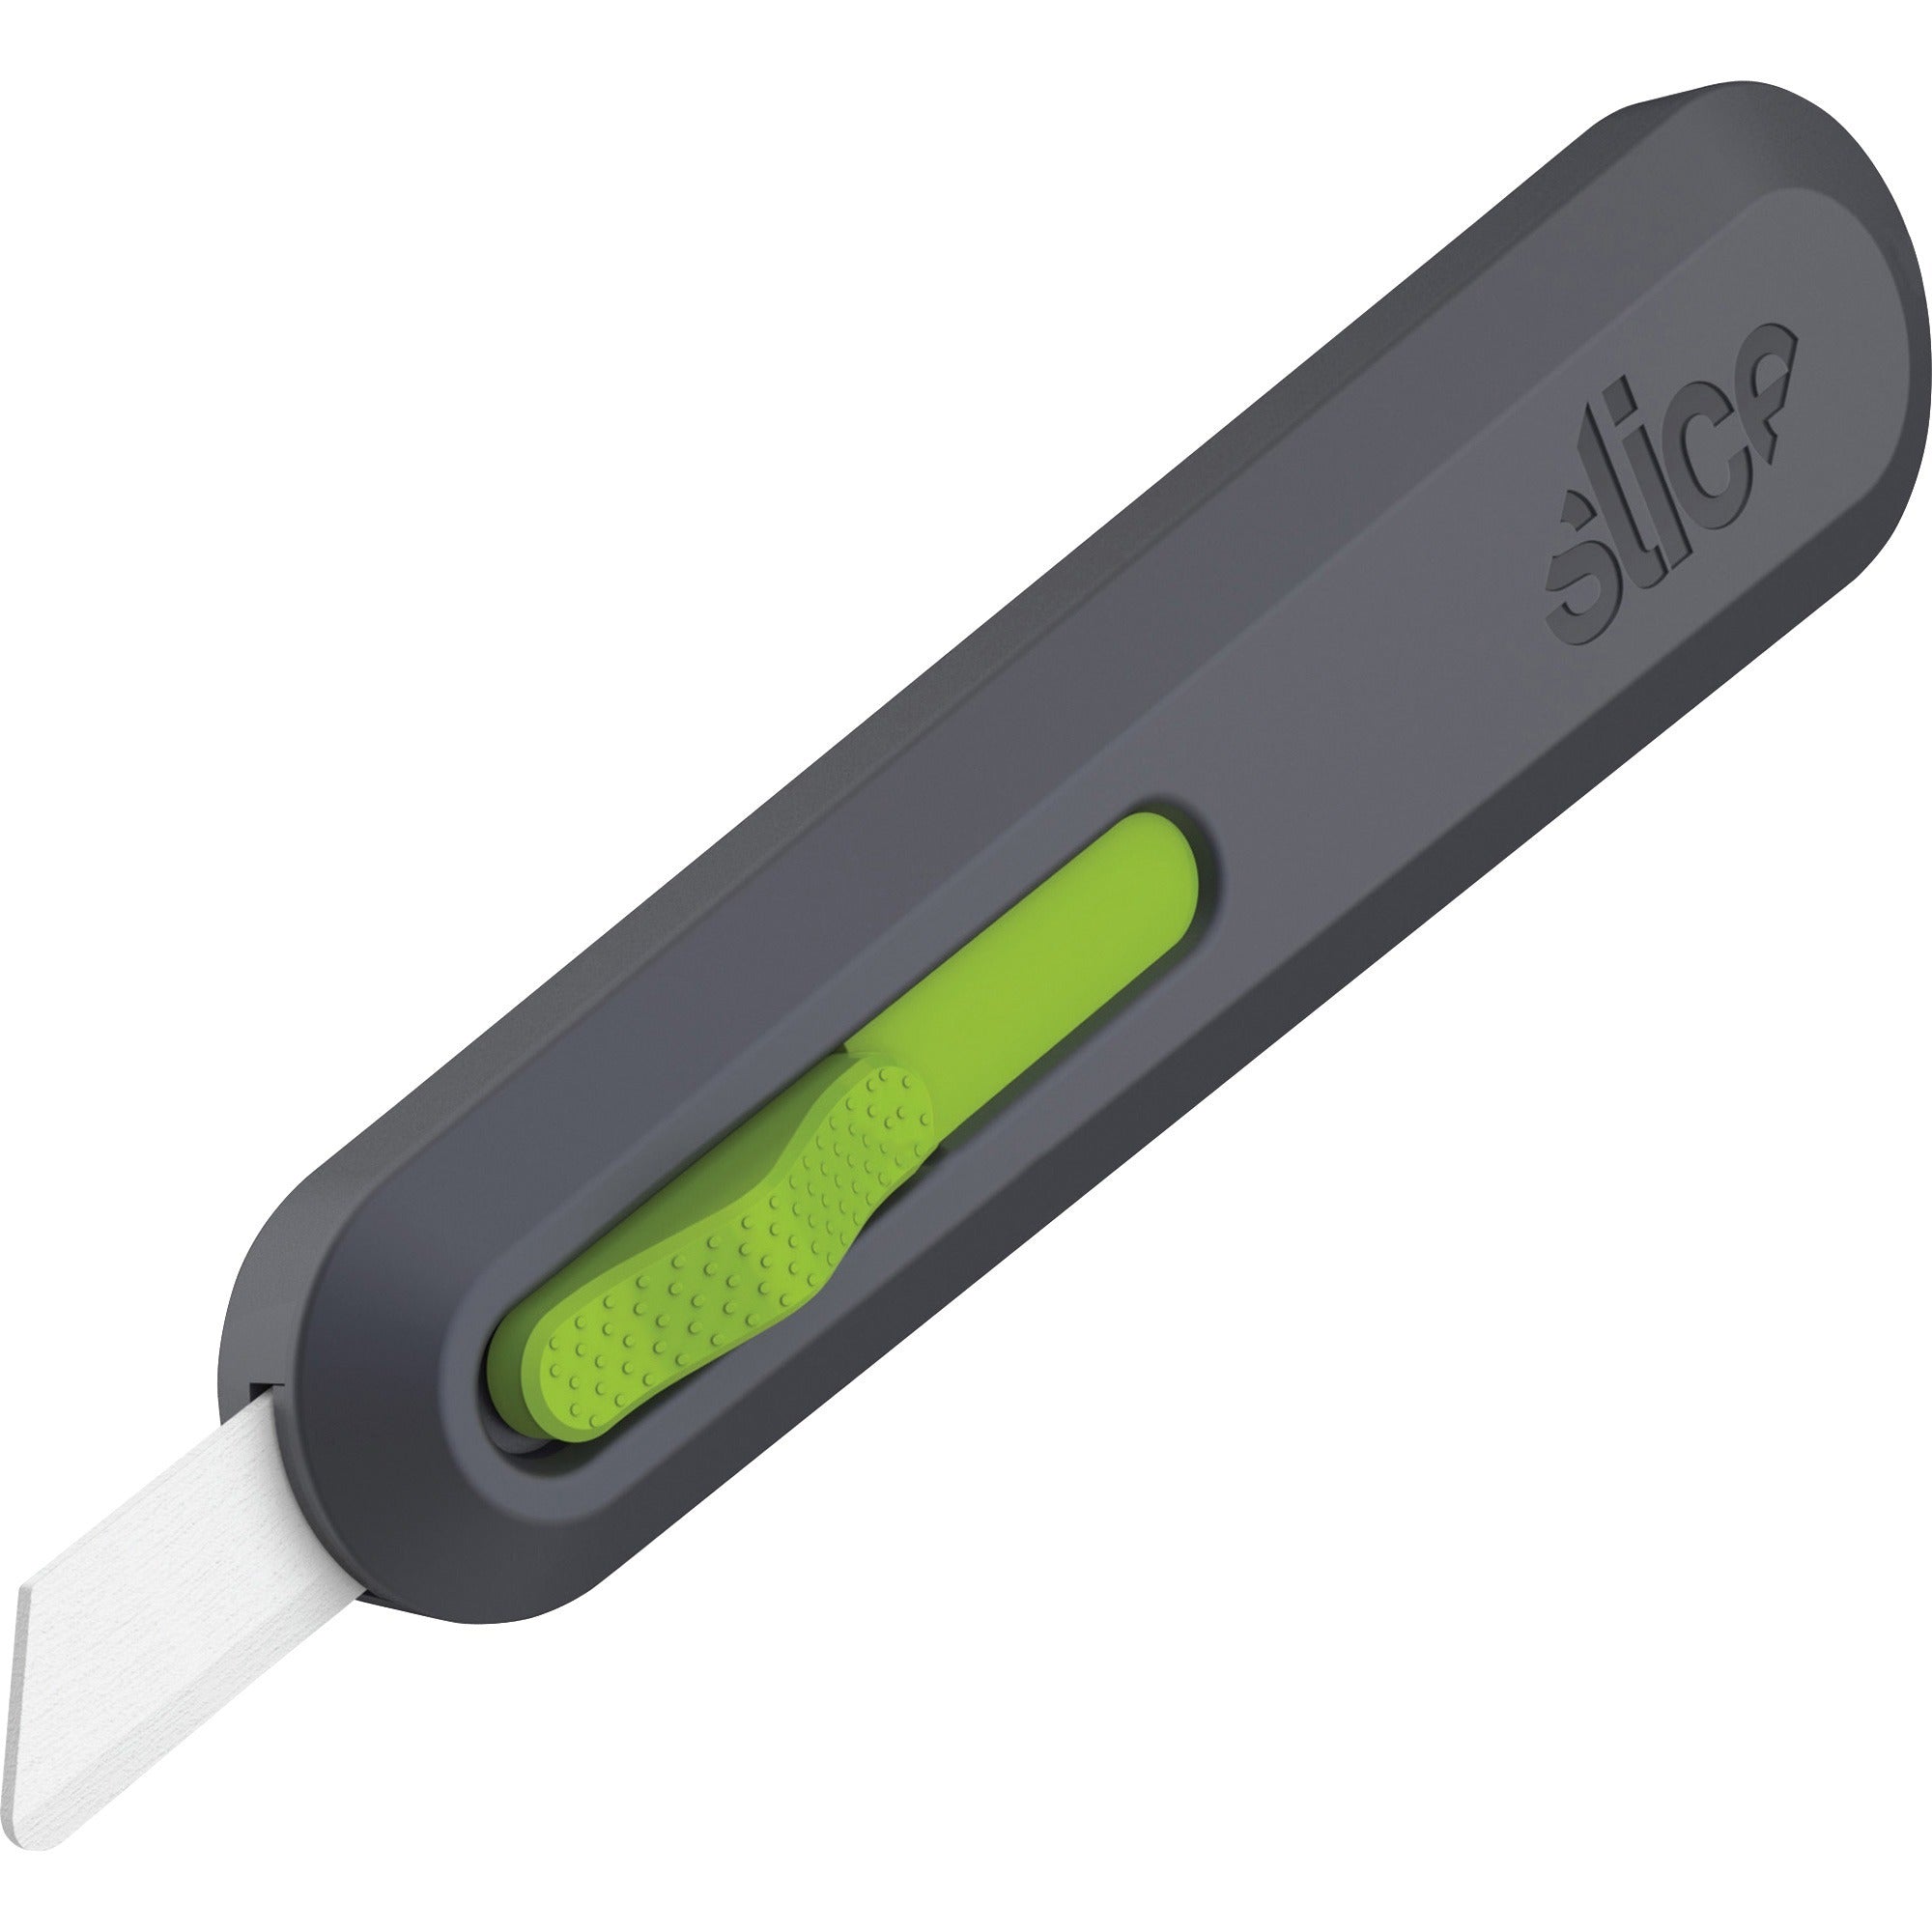 slice-auto-retract-utility-knife-ceramic-blade-retractable-non-sparking-non-conductive-rust-free-blade-durable-ambidextrous-comfortable-glass-filled-nylon-stainless-steel-zirconia-carbon-steel-gray-green-61-length-1-each_sli10554 - 1